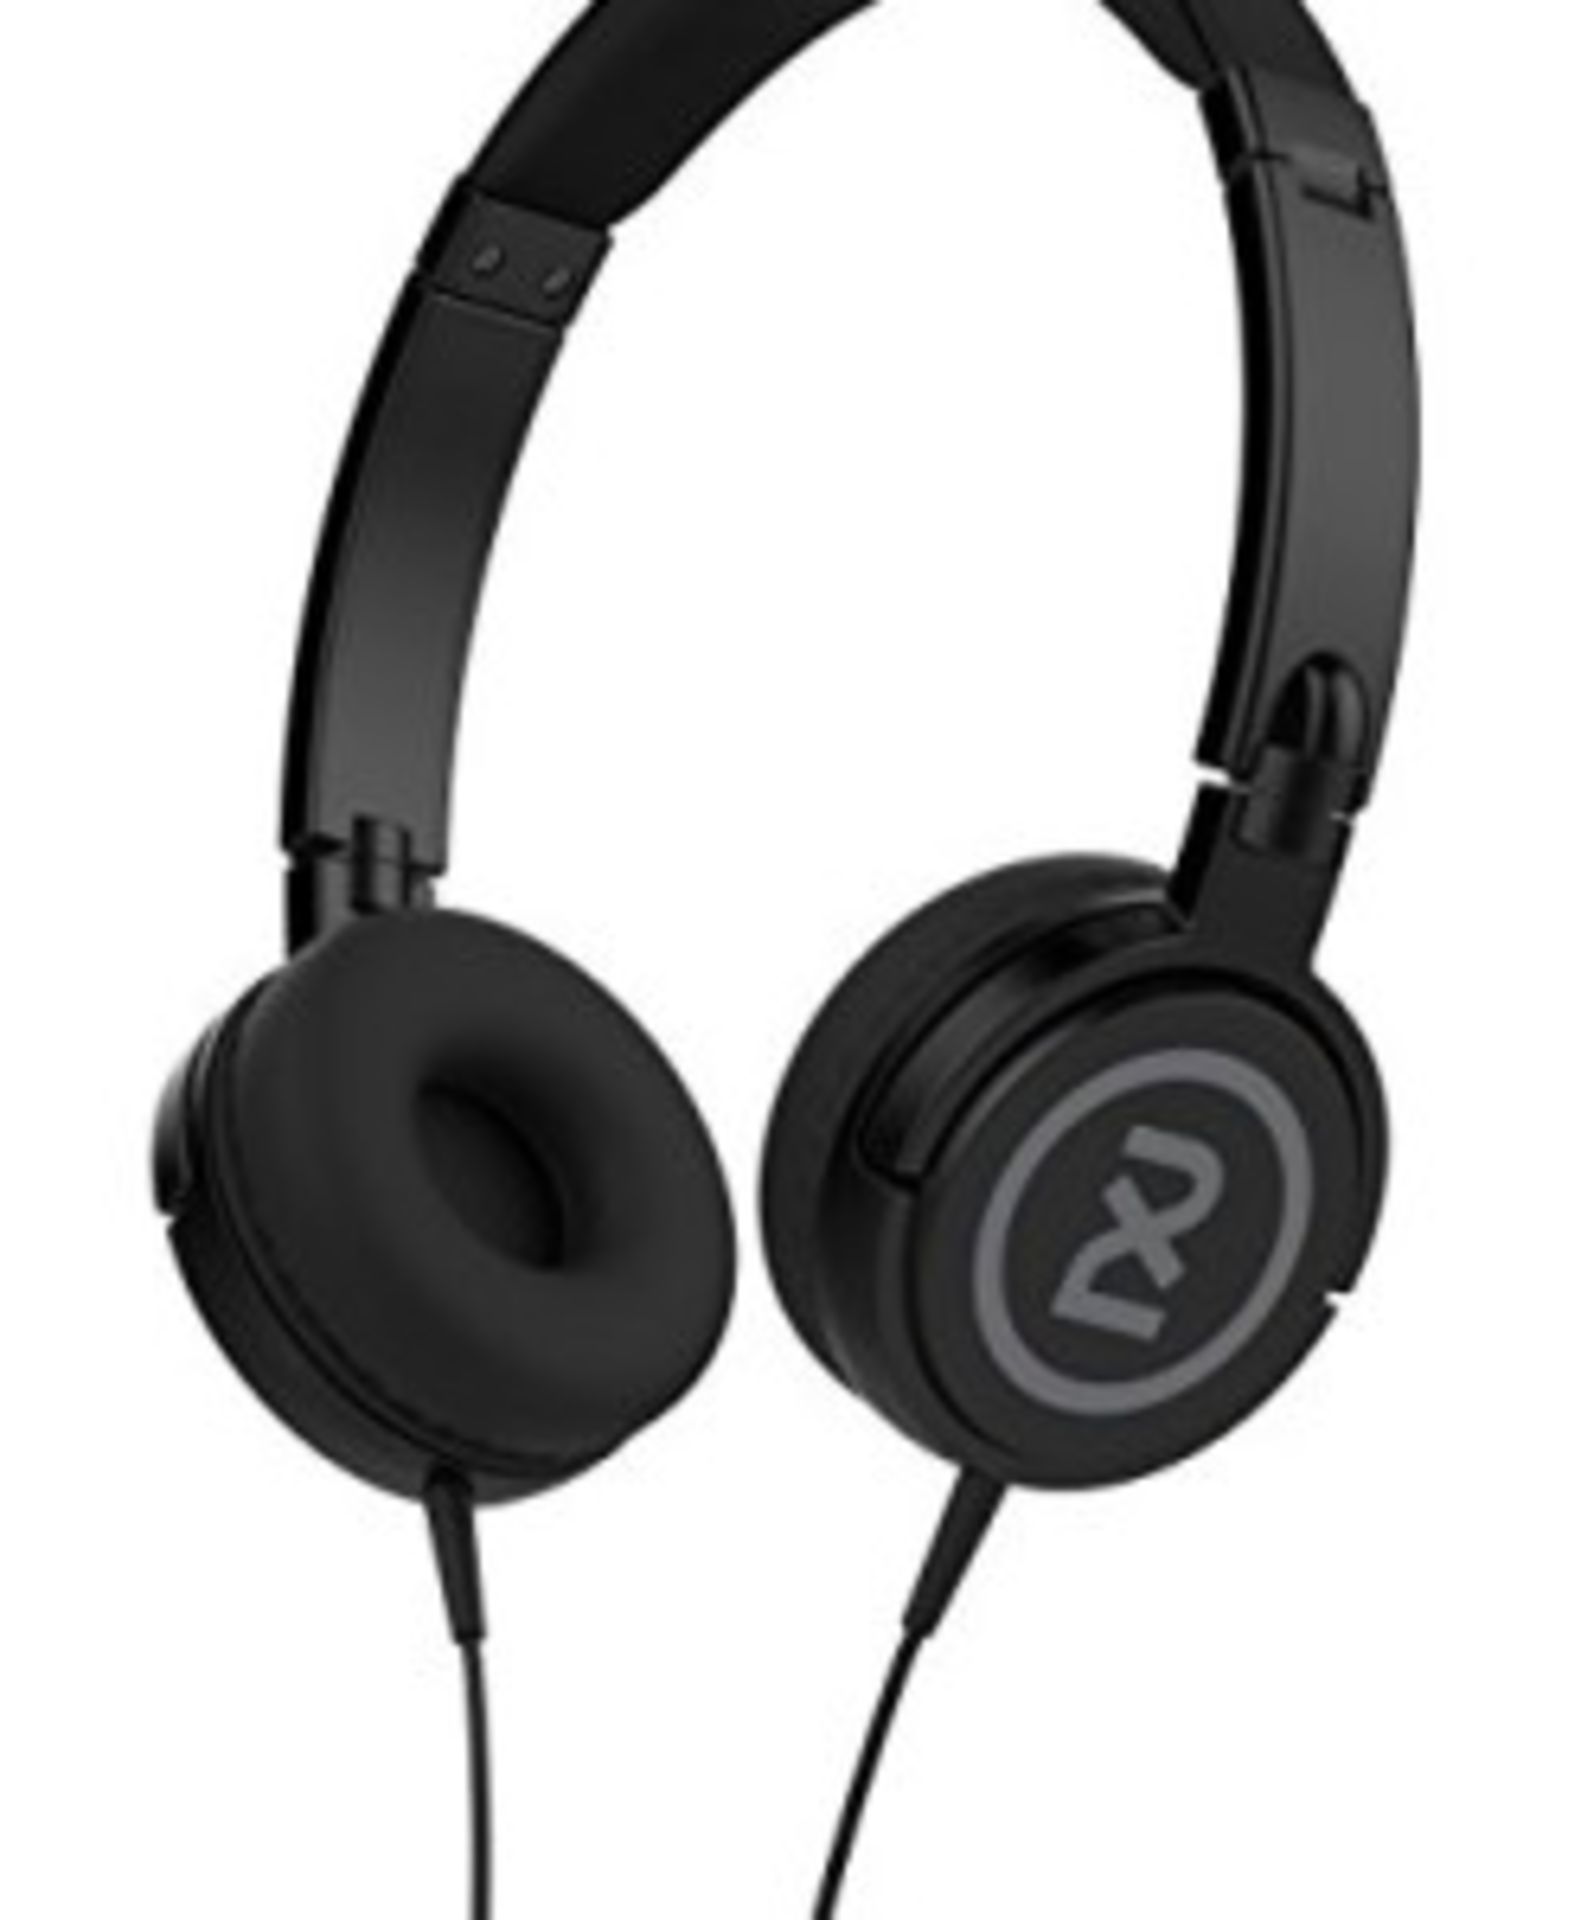 V Brand New Skullcandy 2XL Shakedown Headphones X 2 YOUR BID PRICE TO BE MULTIPLIED BY TWO